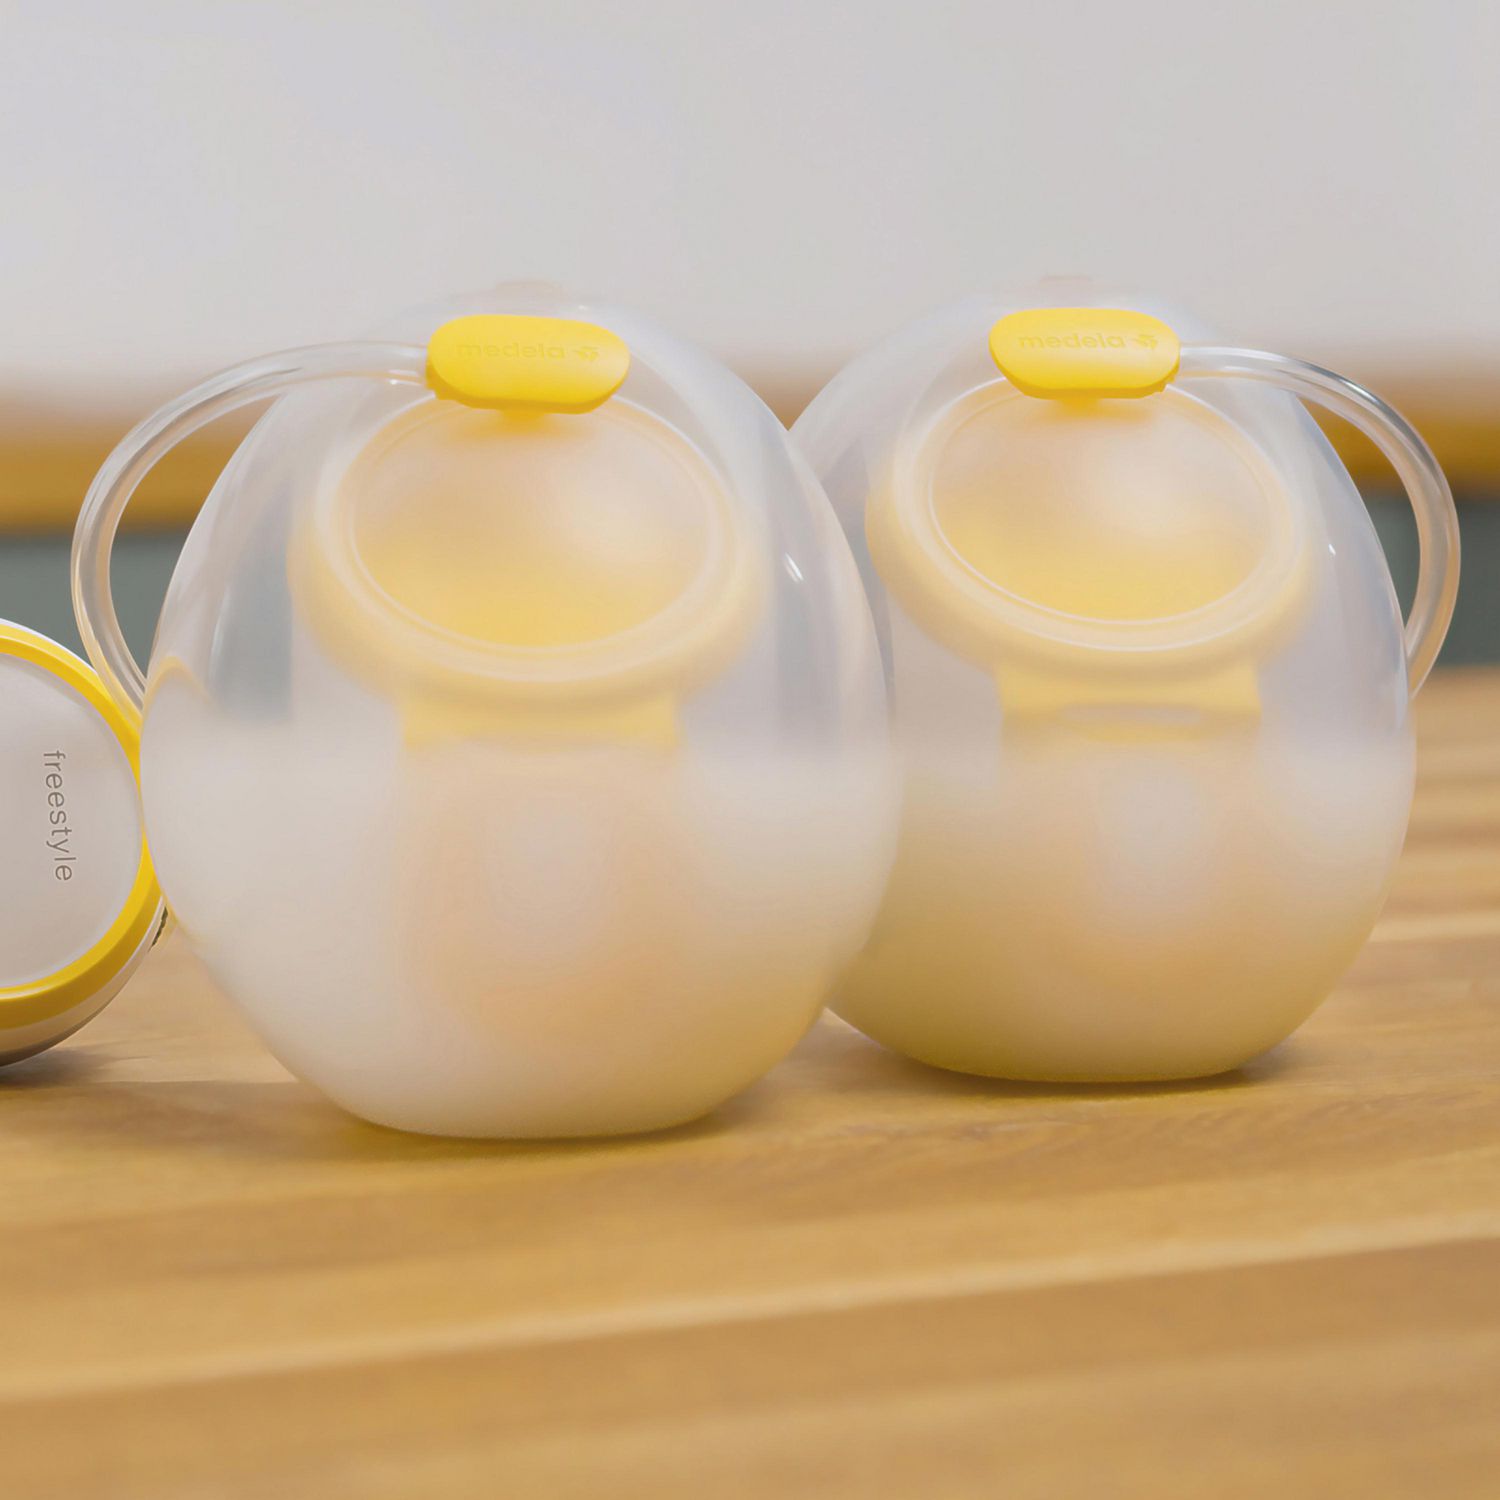 Medela Freestyle Hands-Free Double Electric Breast Pump – Mamas